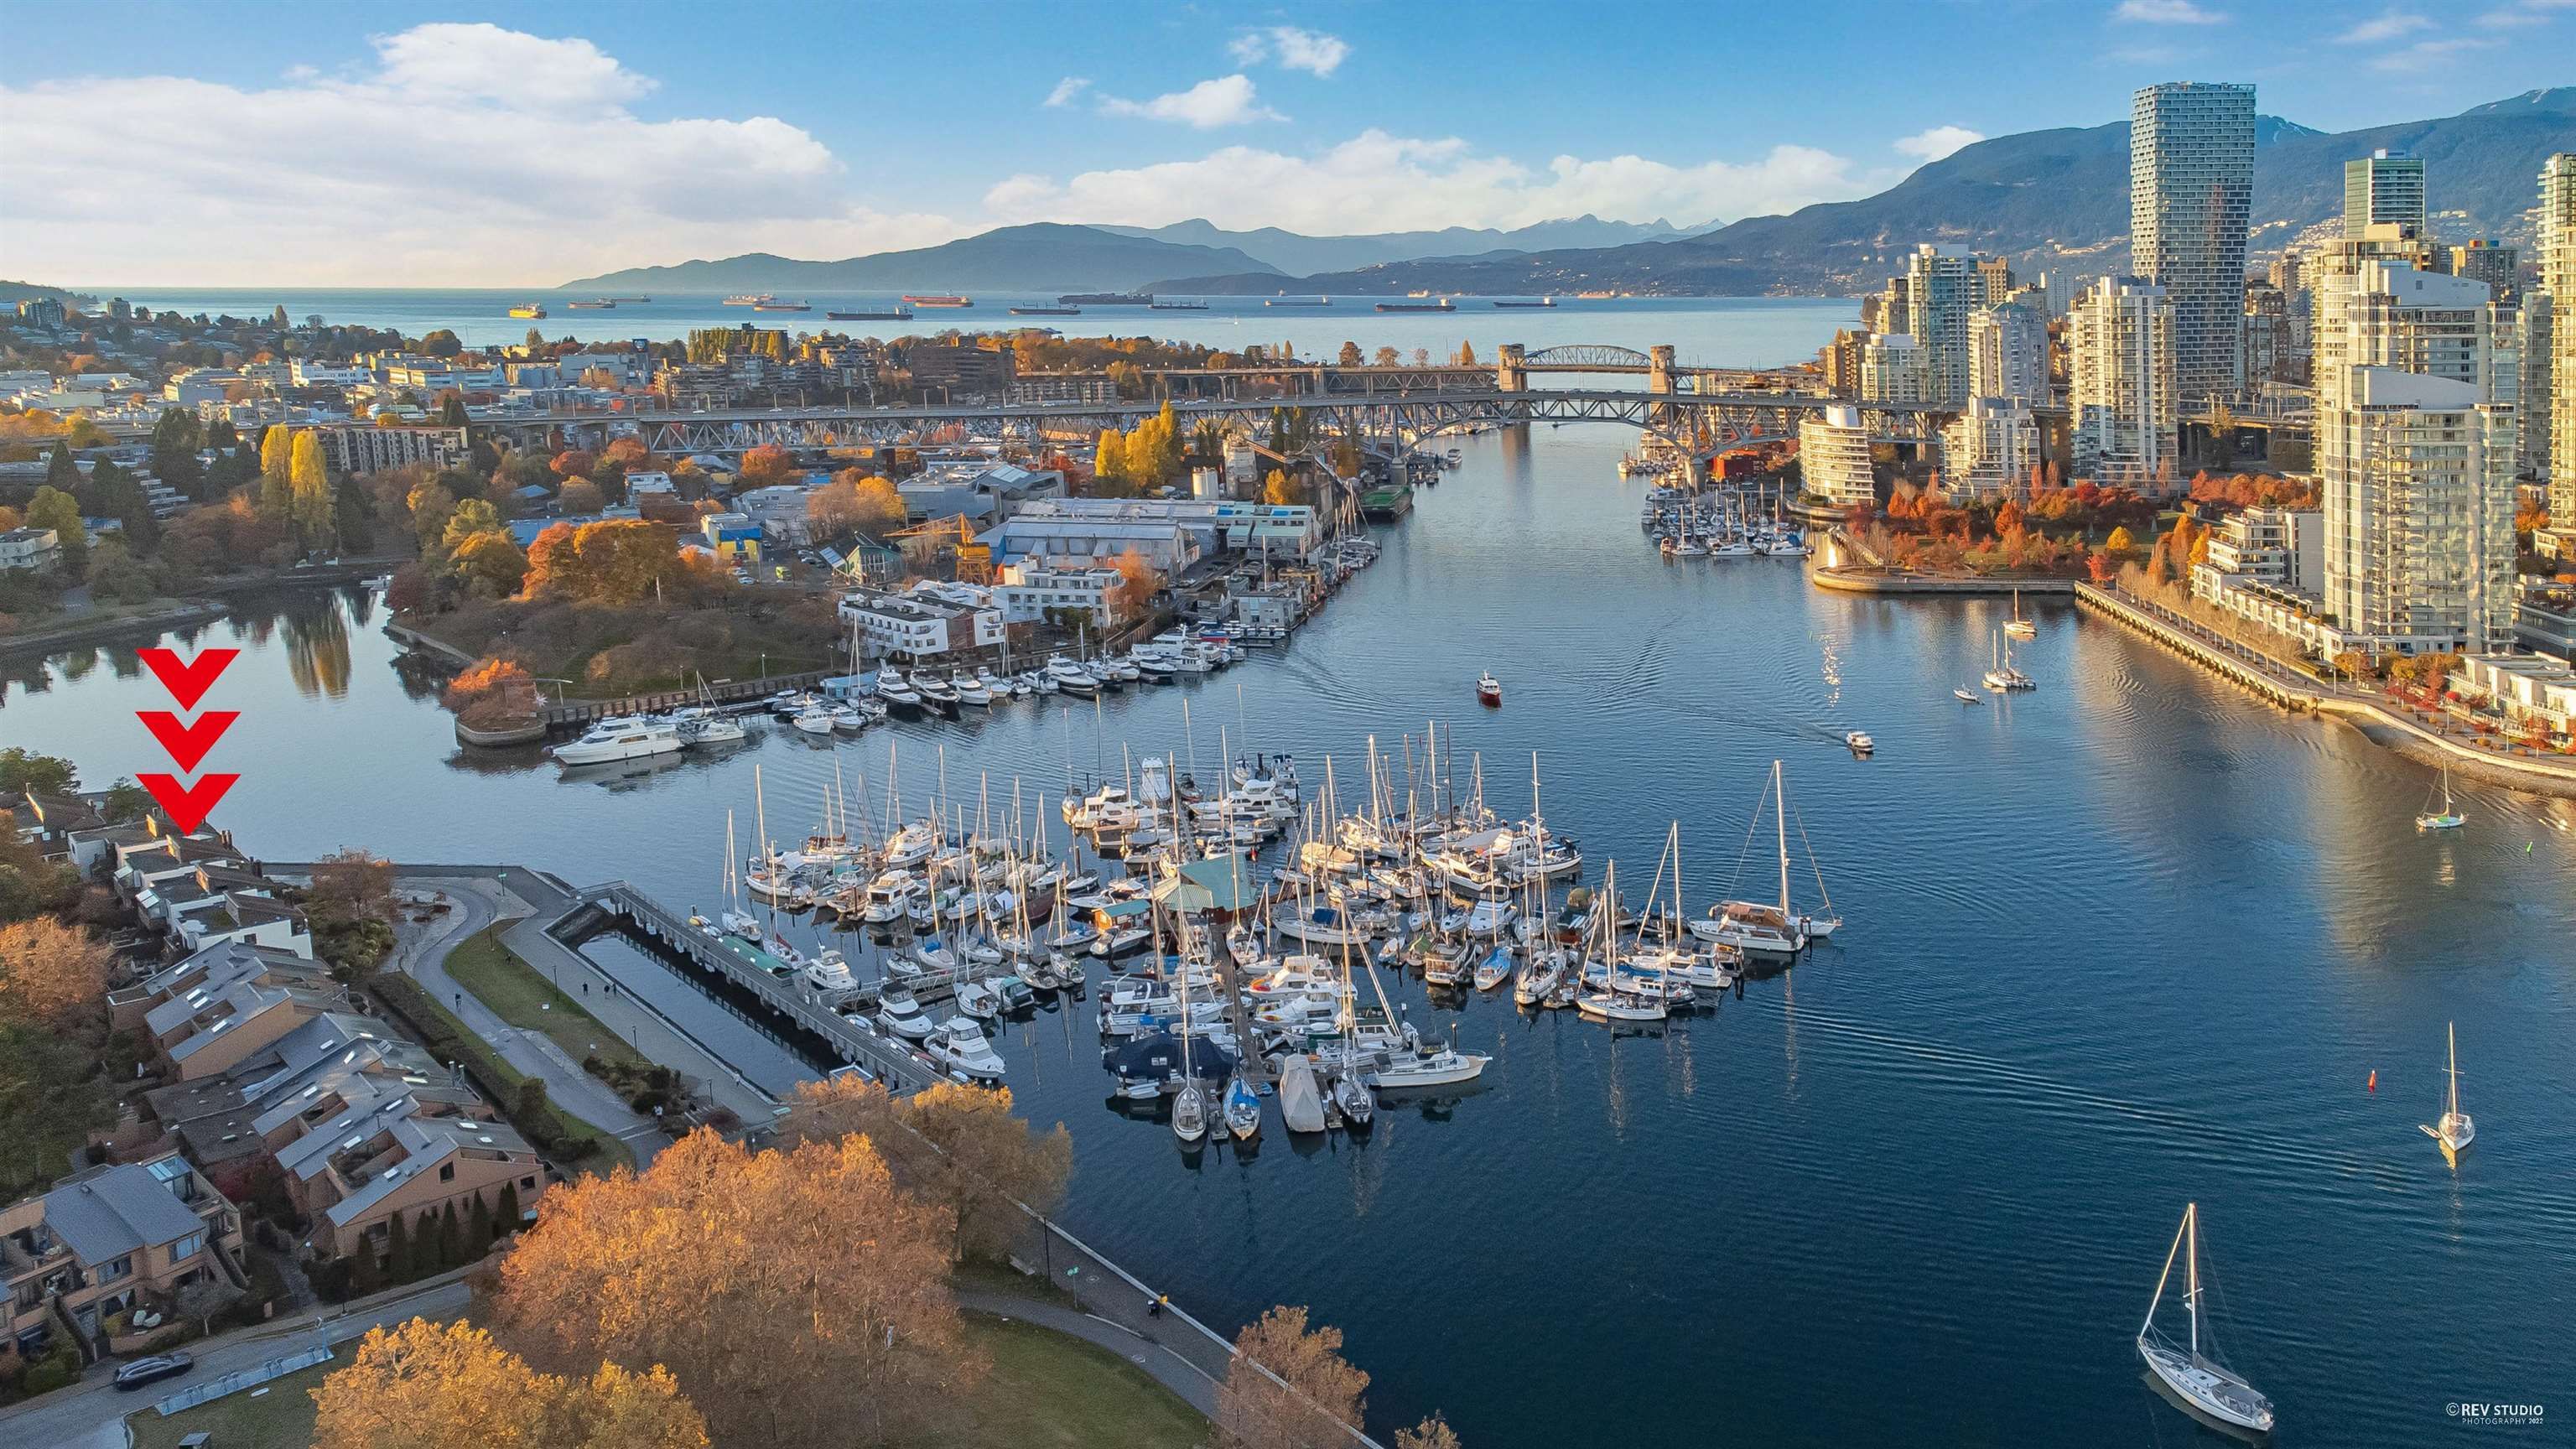 Open House. Open House on Sunday, November 26, 2023 2:15PM - 4:15PM
WATERFRONT TOWNHOUSE w/stunning water, marina, cityscape and mtn views. Larger private corner unit with 3 bedrooms, 2 bathrooms, sunroom, office and covered waterfront deck. Features many